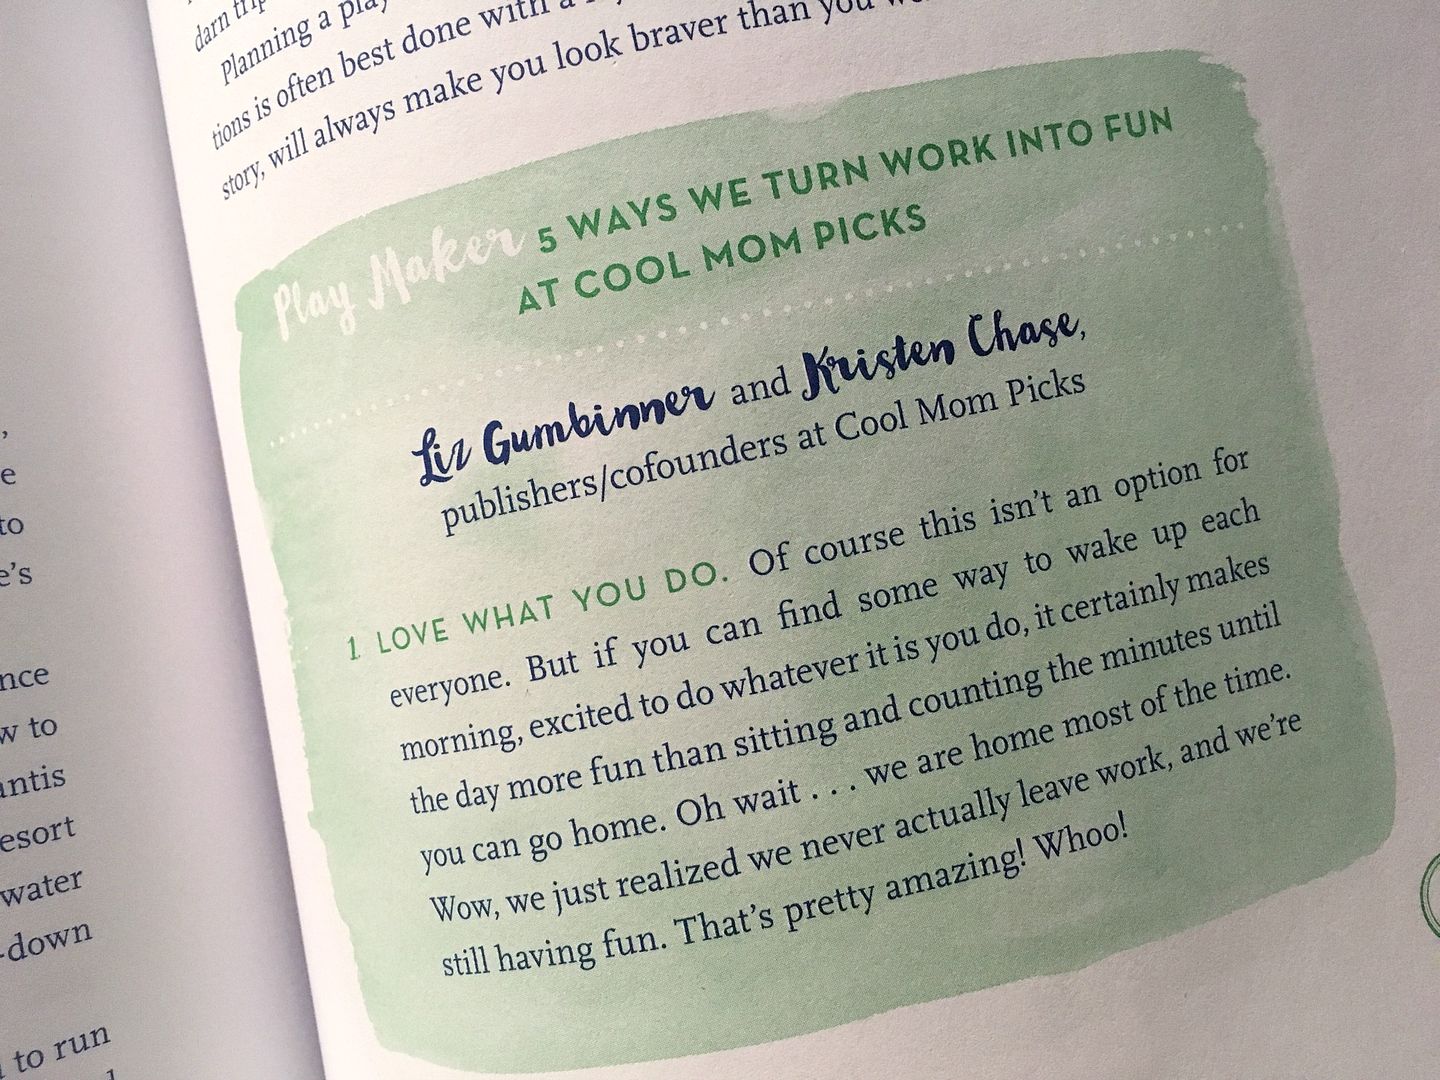 5 ways to turn work into fun at Cool Mom Picks | Well-Played, the new guide to awakening a playful spirit from Meredith Sinclair